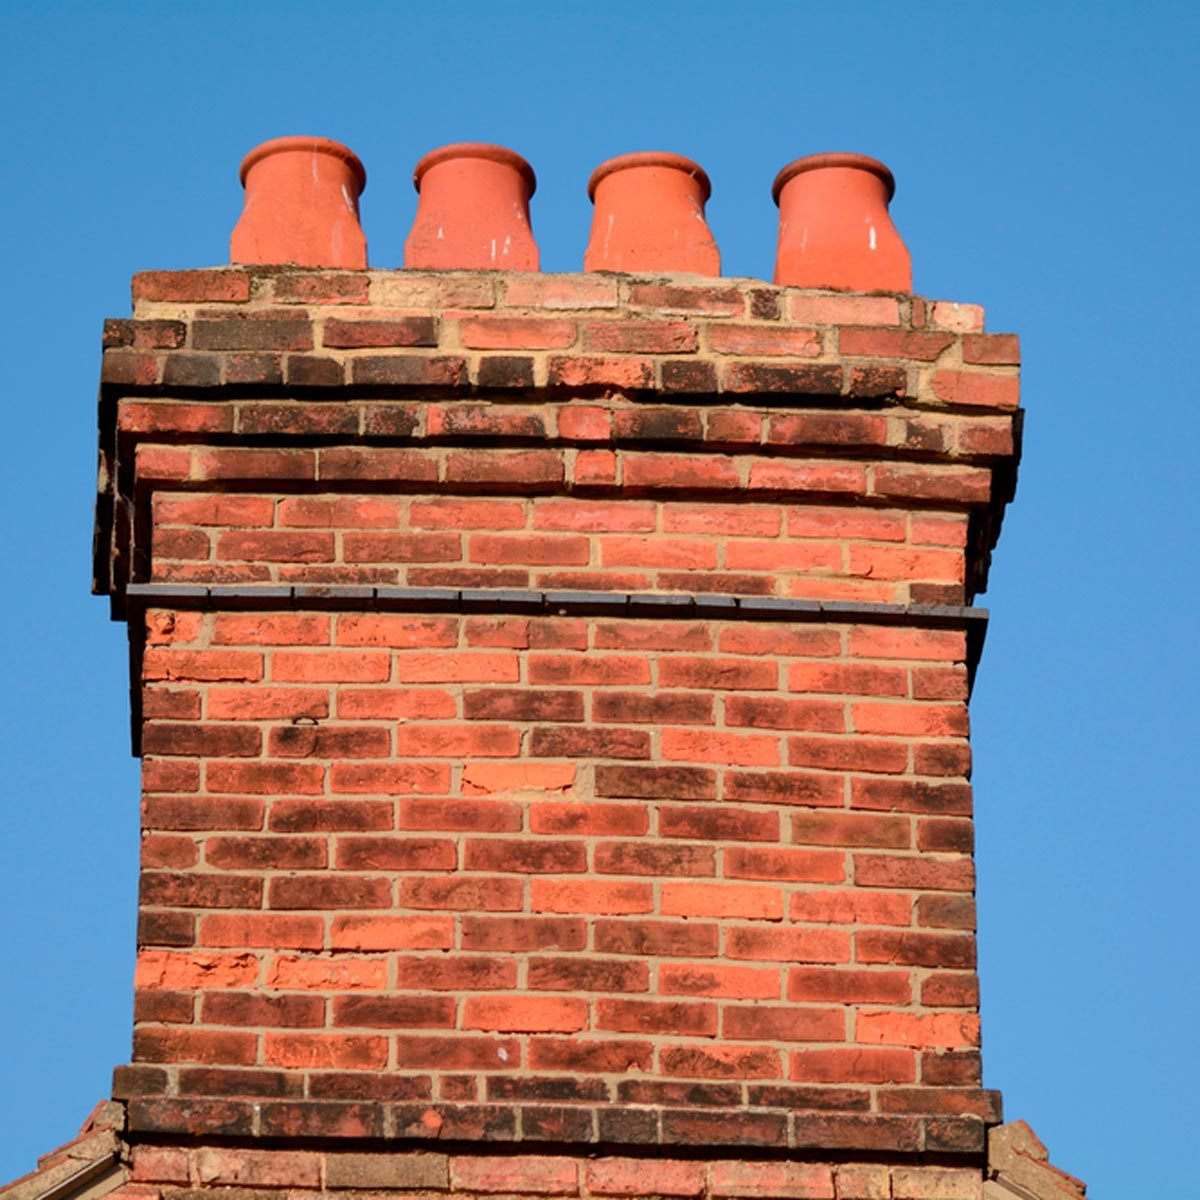 What is a Chimney Pot?